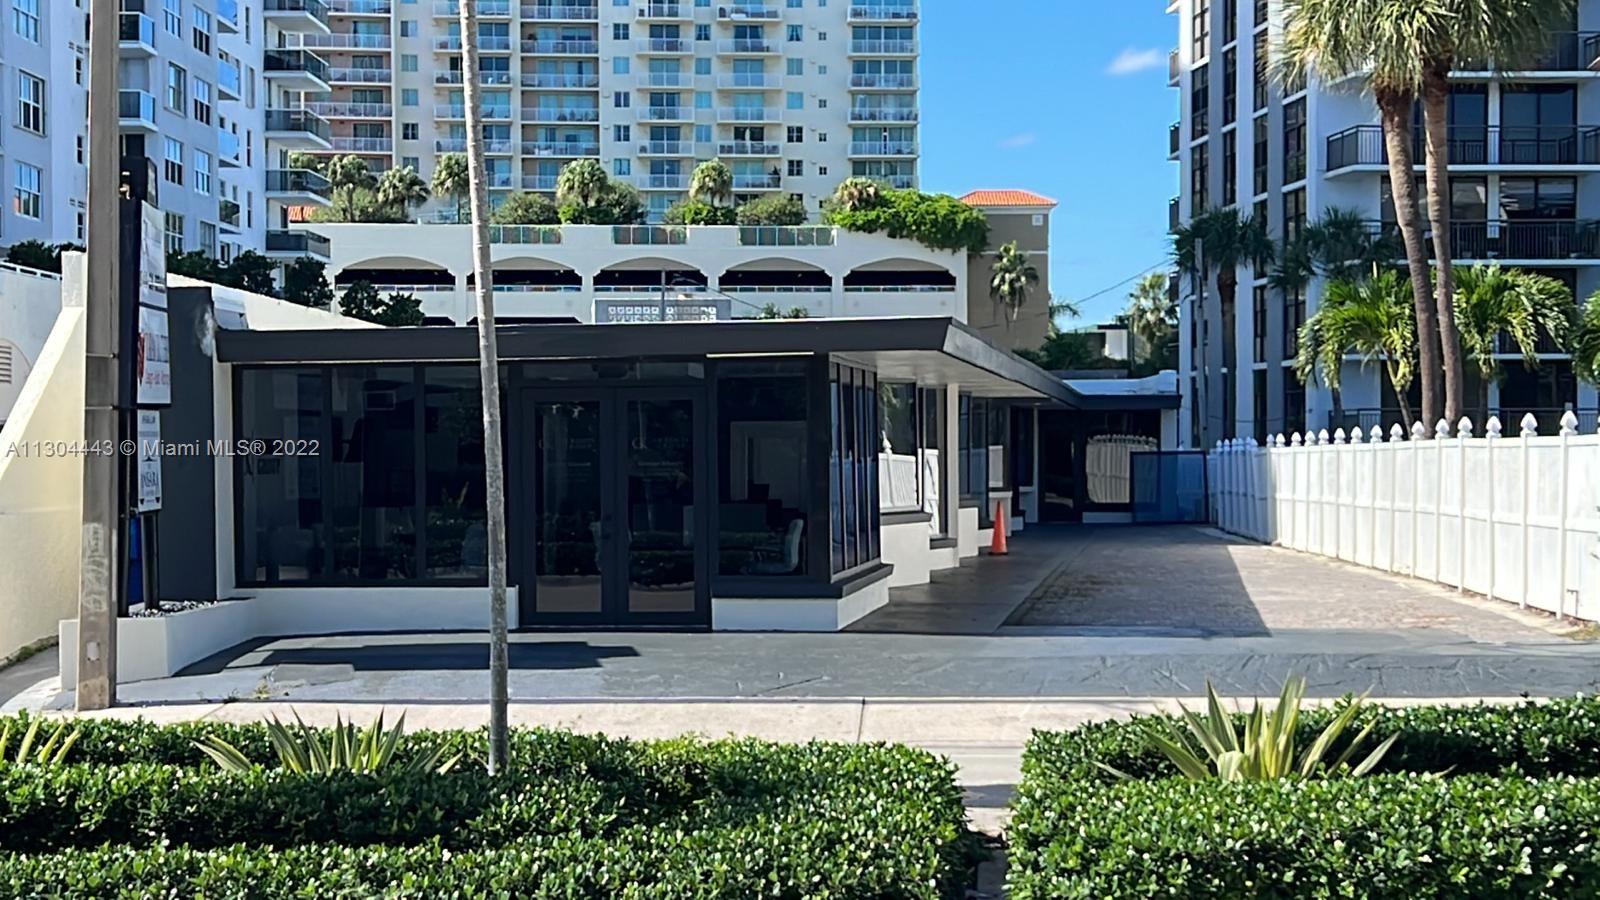 Prime location ,A1A and Oakland 440  sf retail space, can be used for law office , barber shop ,liquor/ convenient stores and more , the building was completely renovated and new impact glass and doors where installed . for additional parking there is public parking garage behind the building .